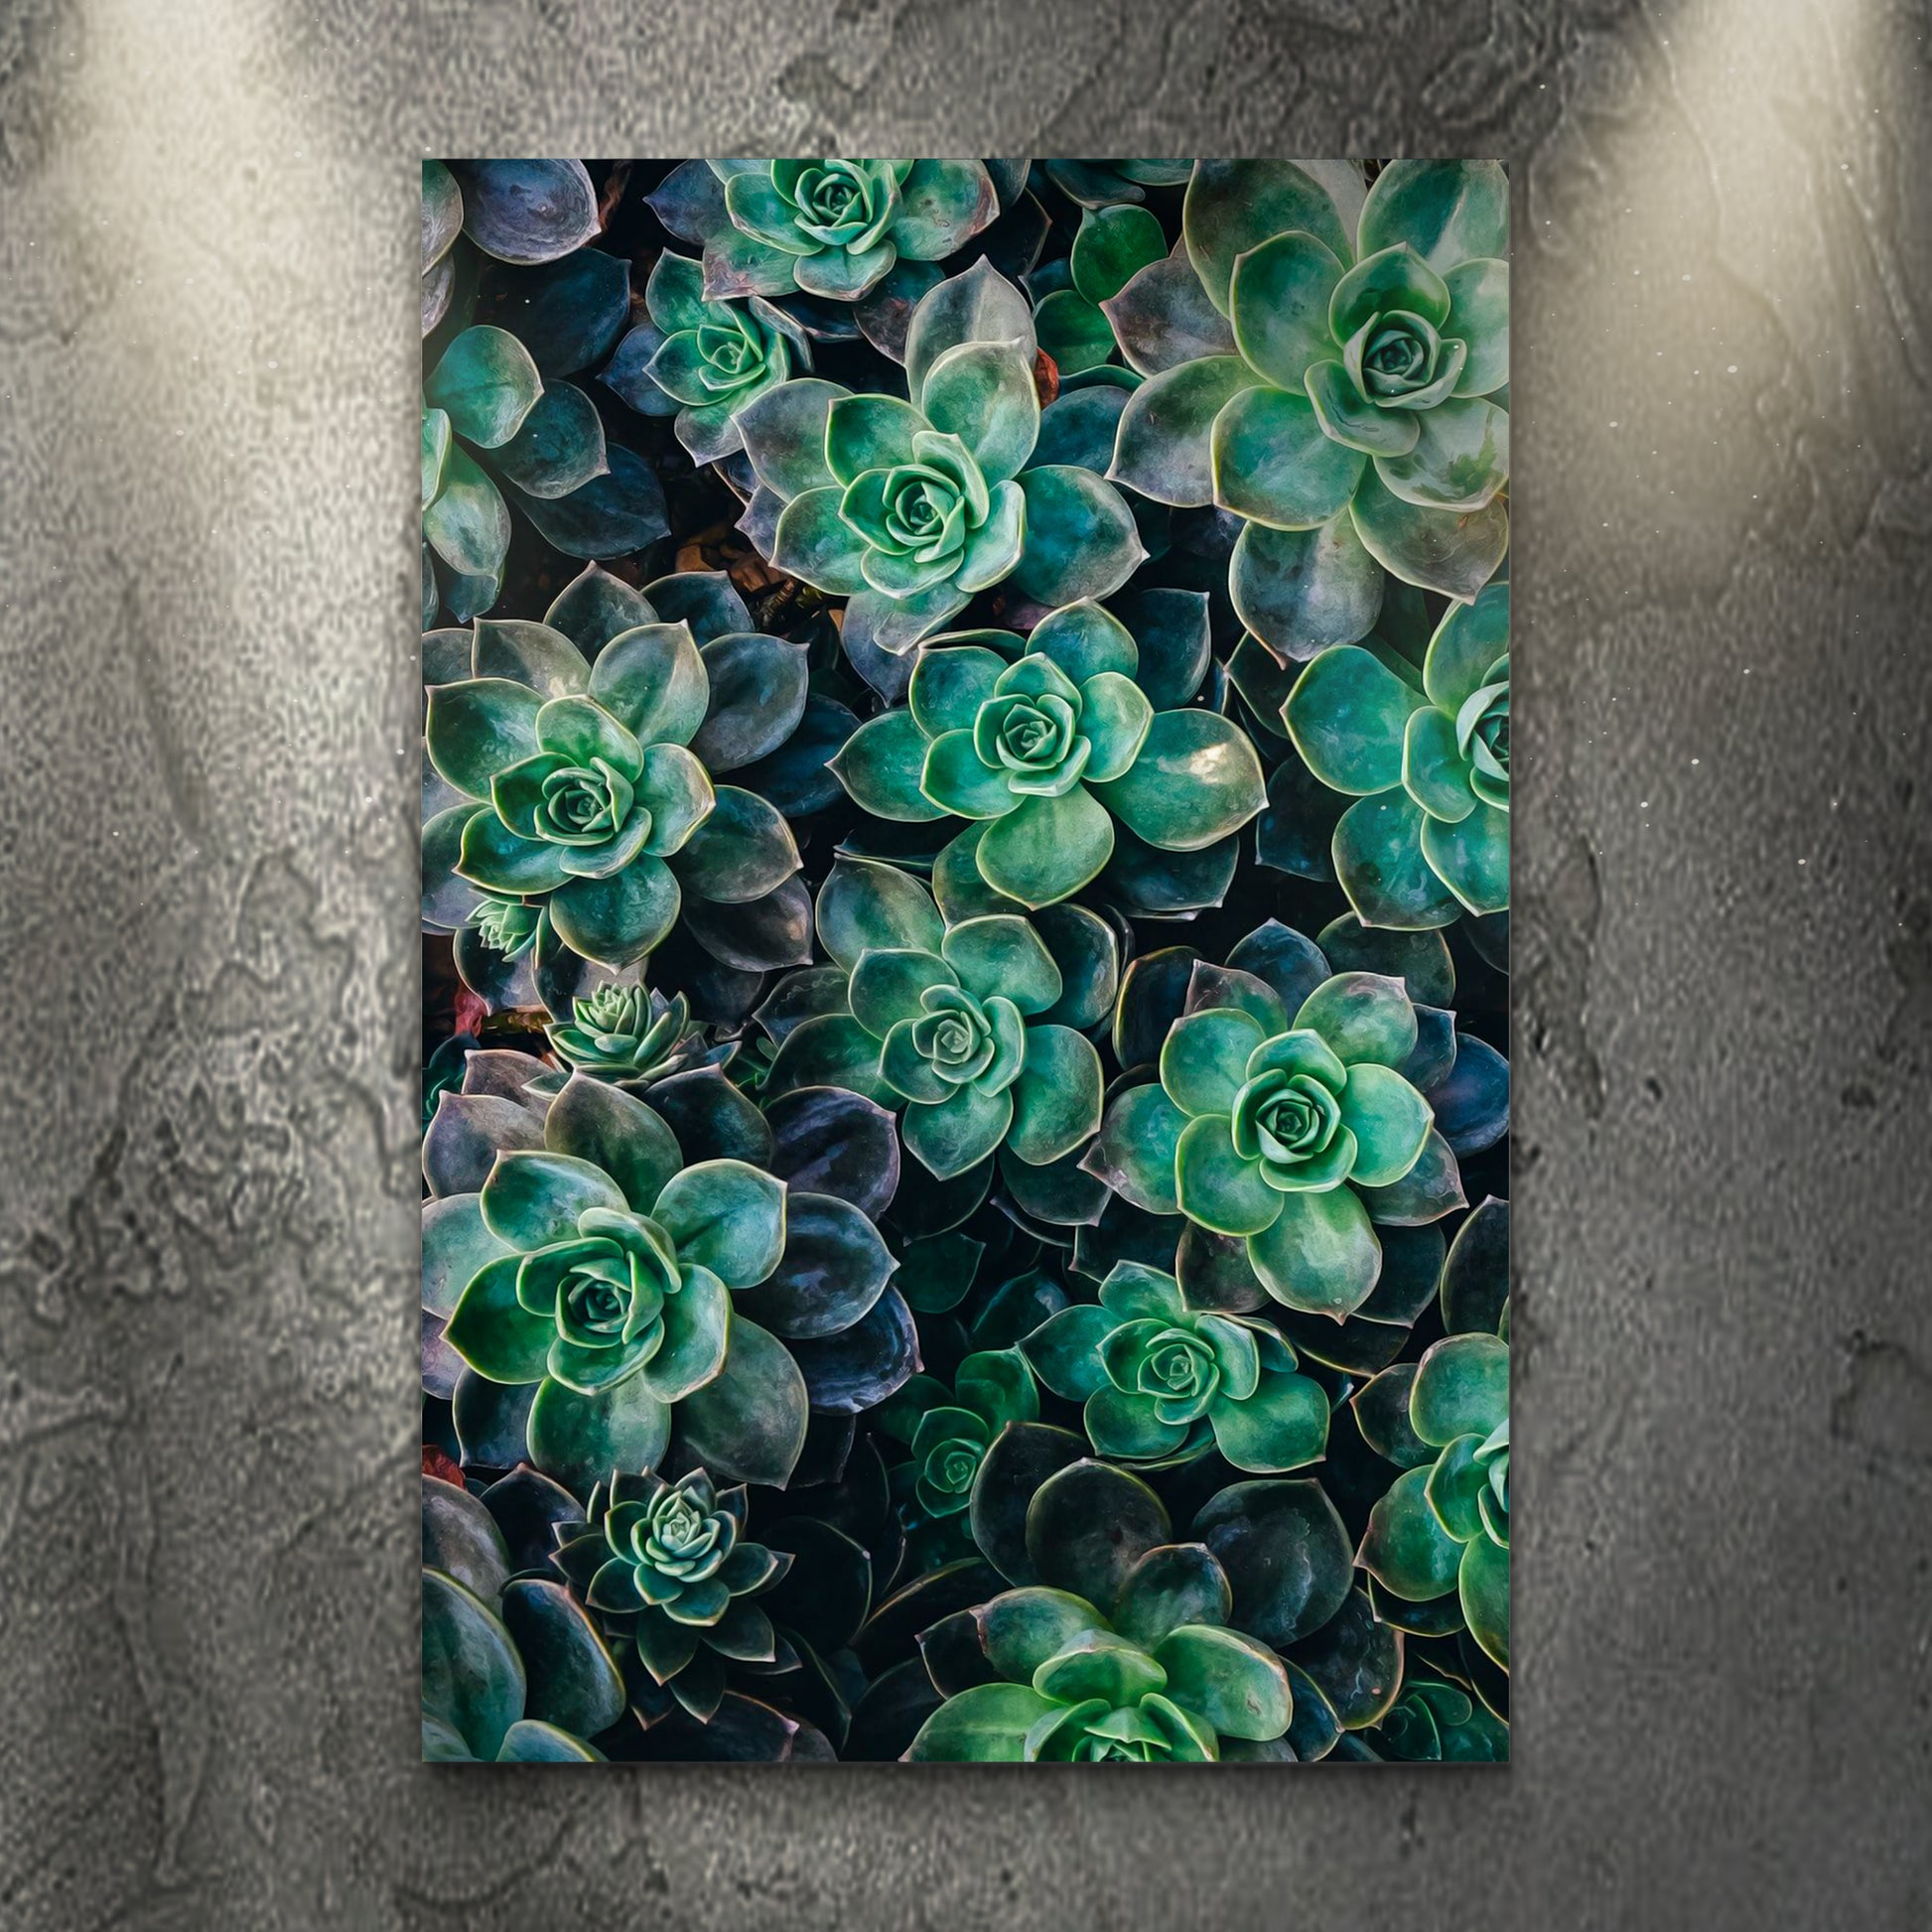 Greenery Succulents Canvas Wall Art - Image by Tailored Canvases